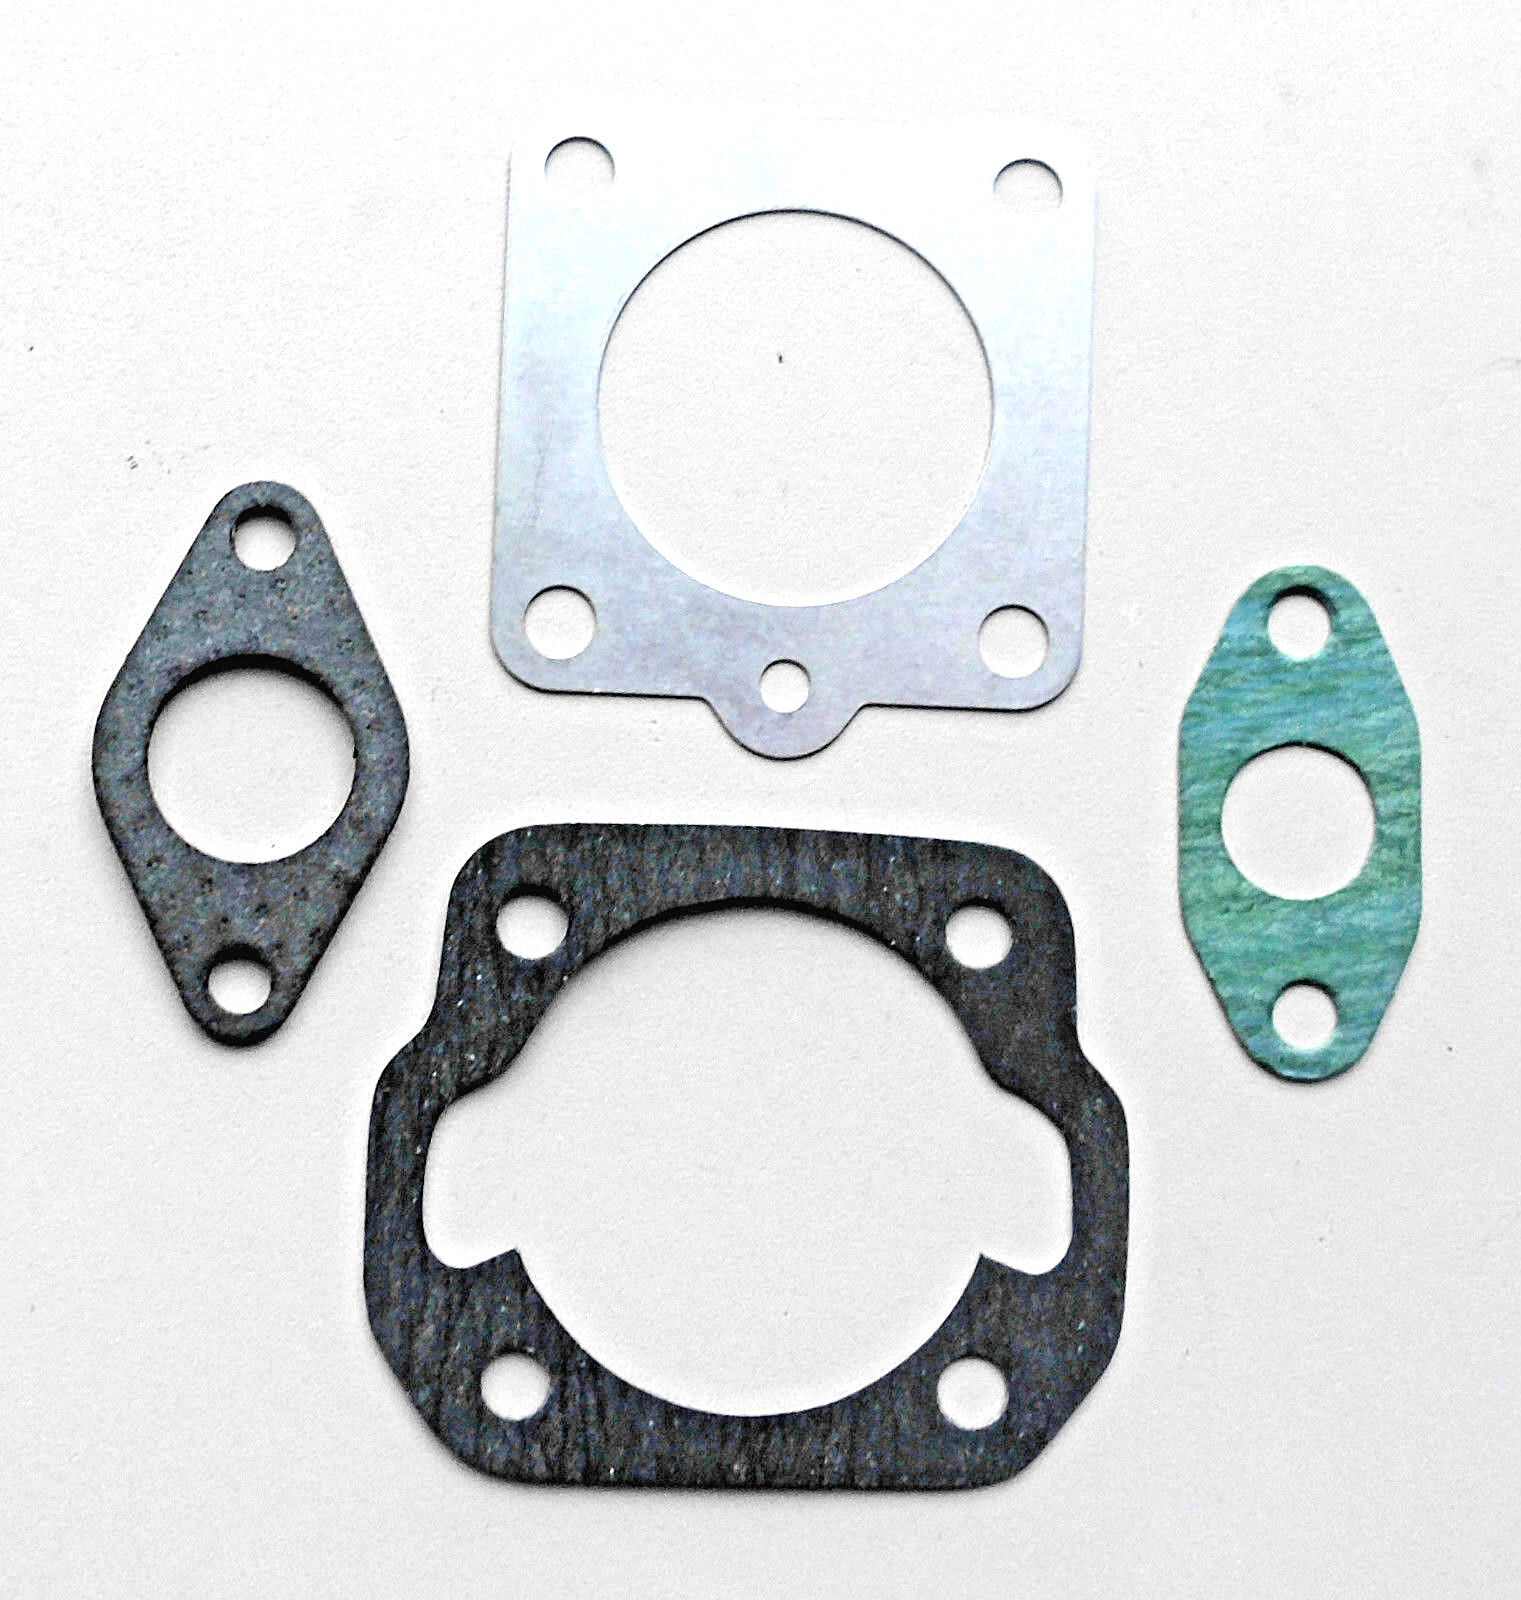 Puch Cylinder Gasket Set For 38mm Puch Moped Cylinder Motors With Liegendem Zyl